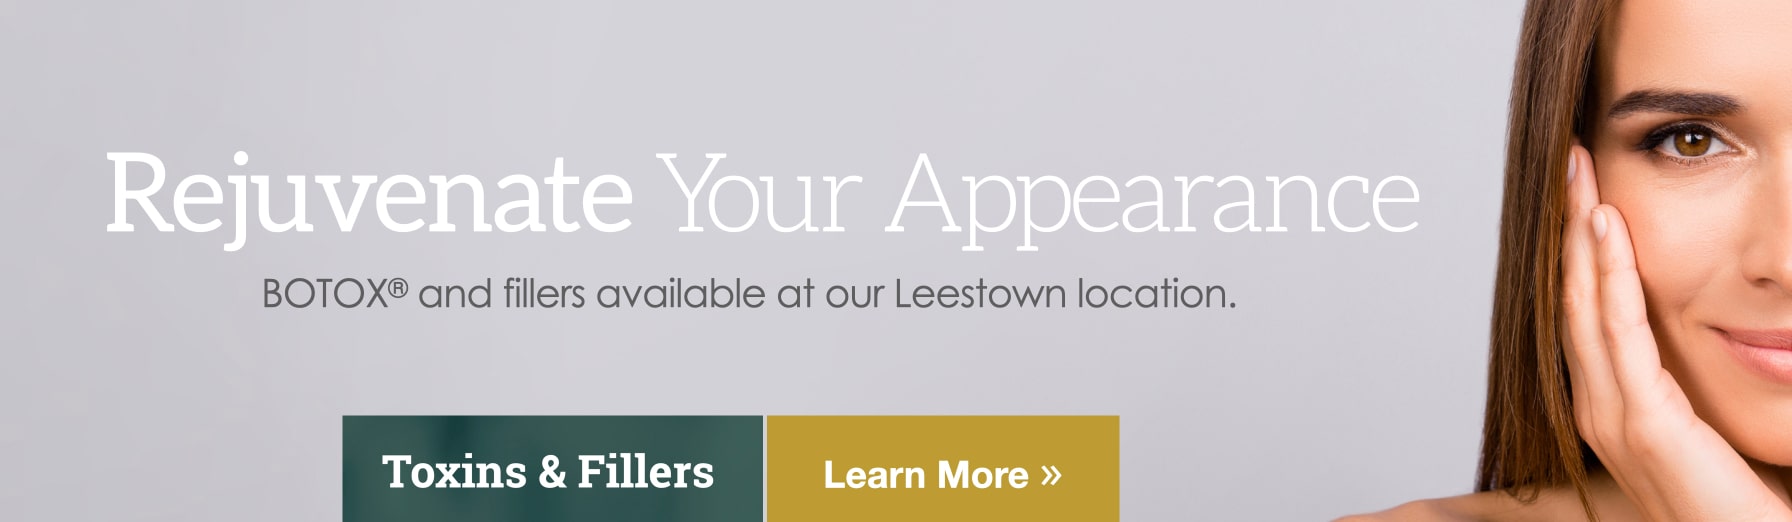 leestown botox and fillers available at Leestown location